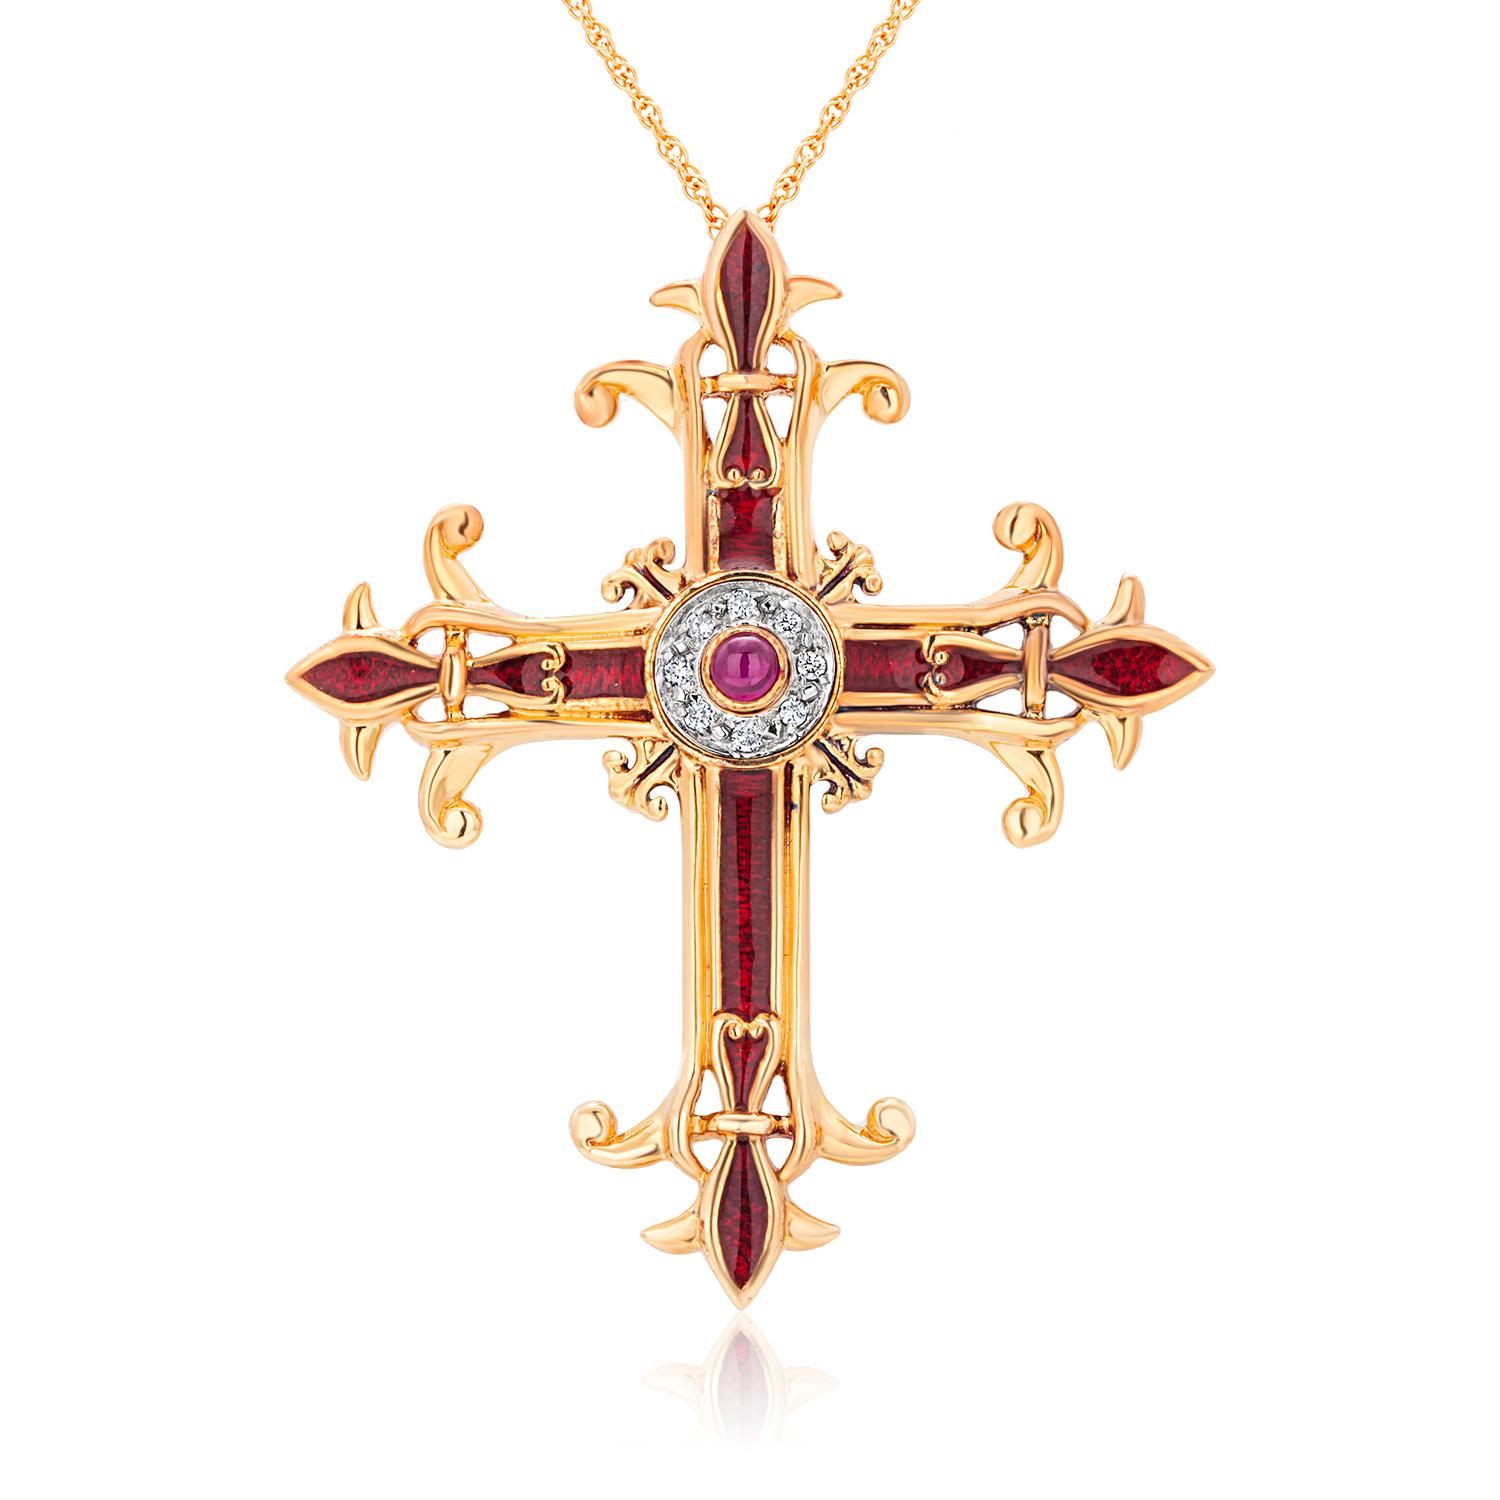 Russian Revival Igor Carl Faberge Diamond Ruby Red Enamel Imperial Yellow Gold Cross Necklace 